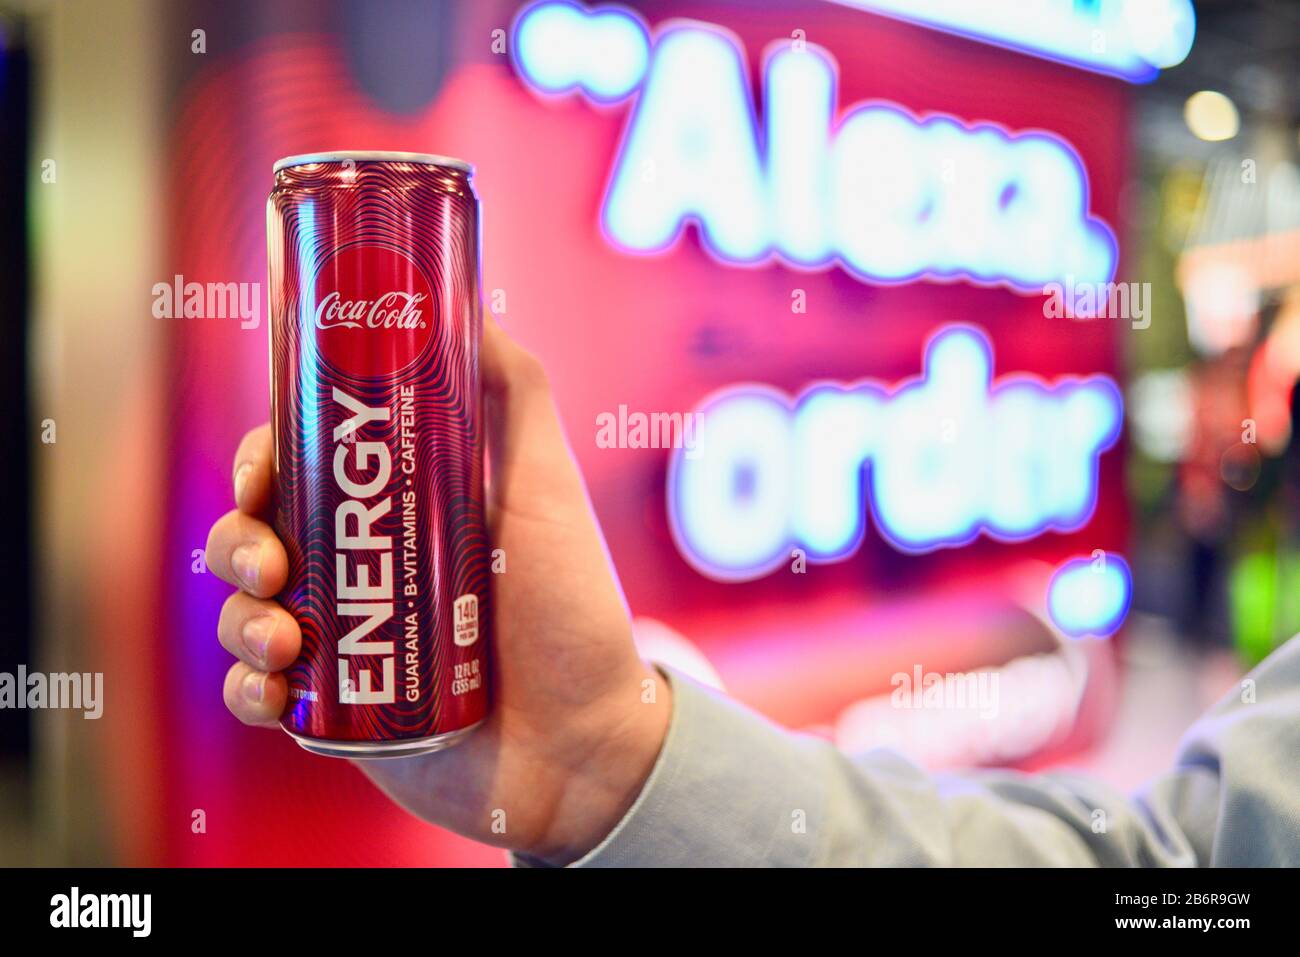 Coca-Cola Energy Drink launched at CES, where show attendees placed their  order by using Amazon Alexa voice assistant, Las Vegas, NV, USA Stock Photo  - Alamy